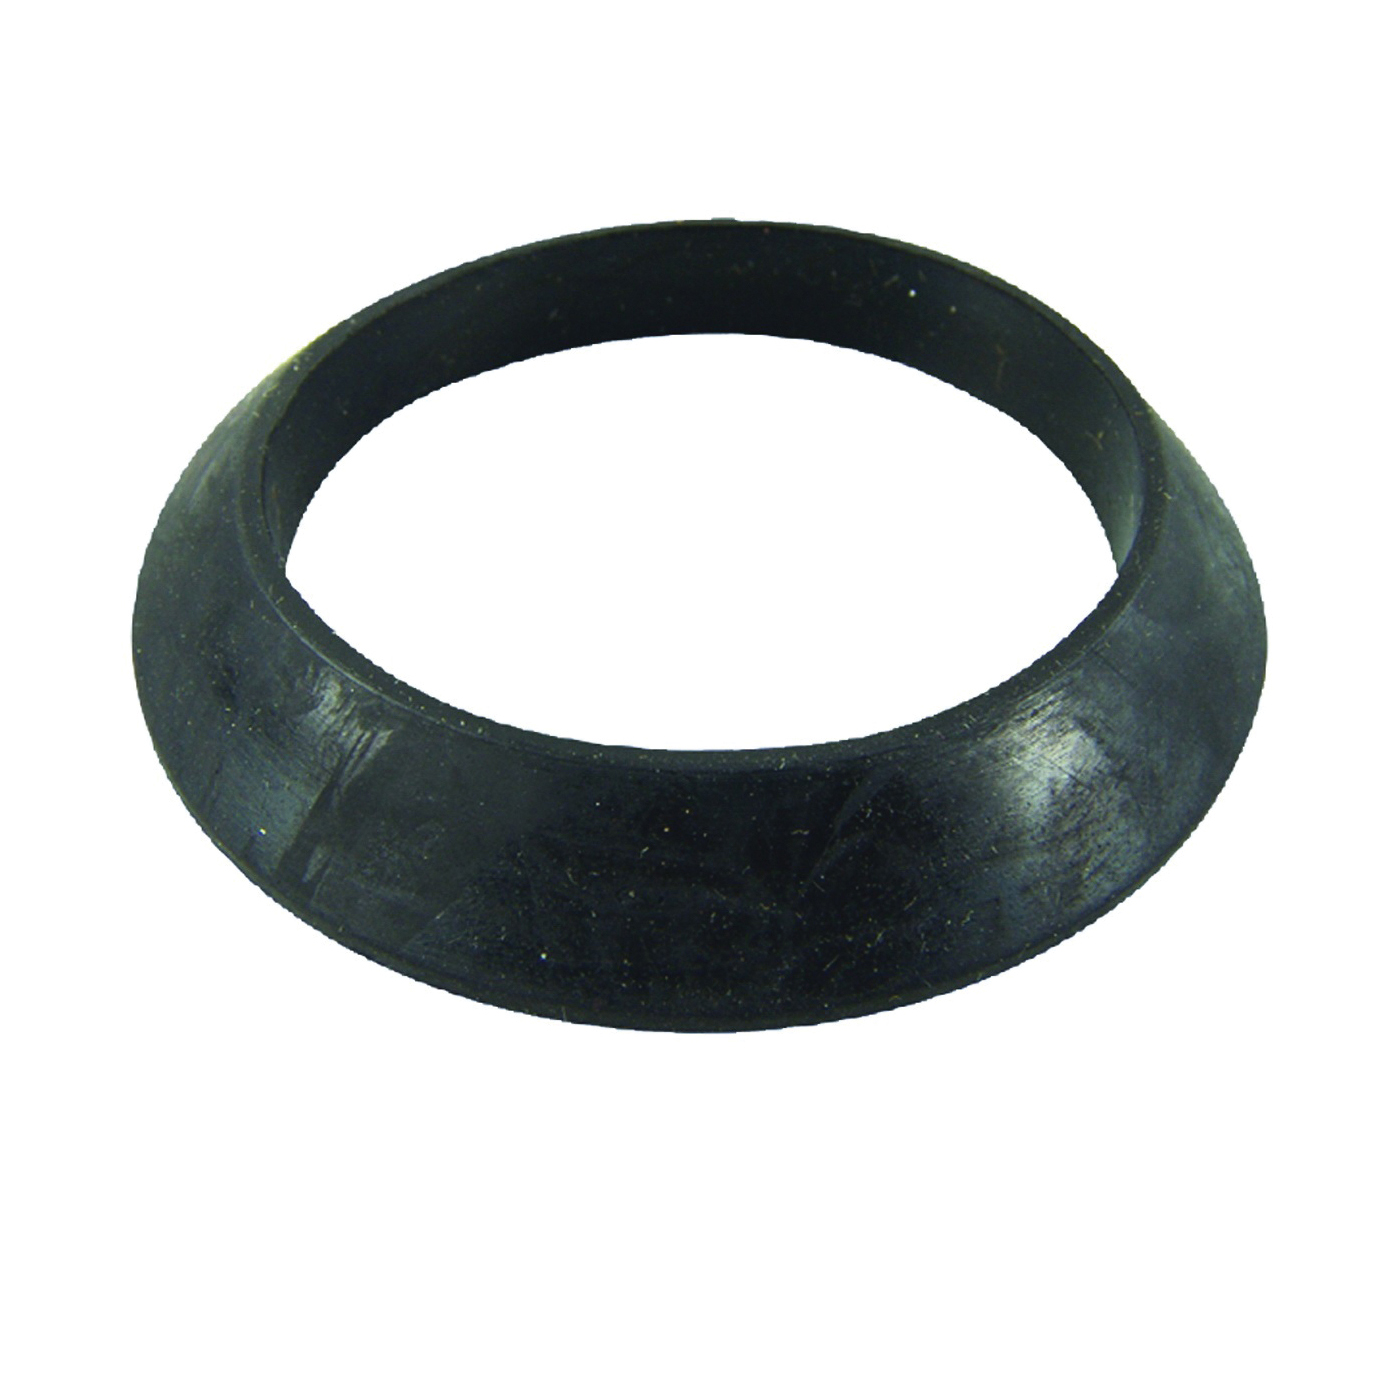 88361 Tank-To-Bowl Spud Gasket, Rubber, Black, For: Mansfield Toilets